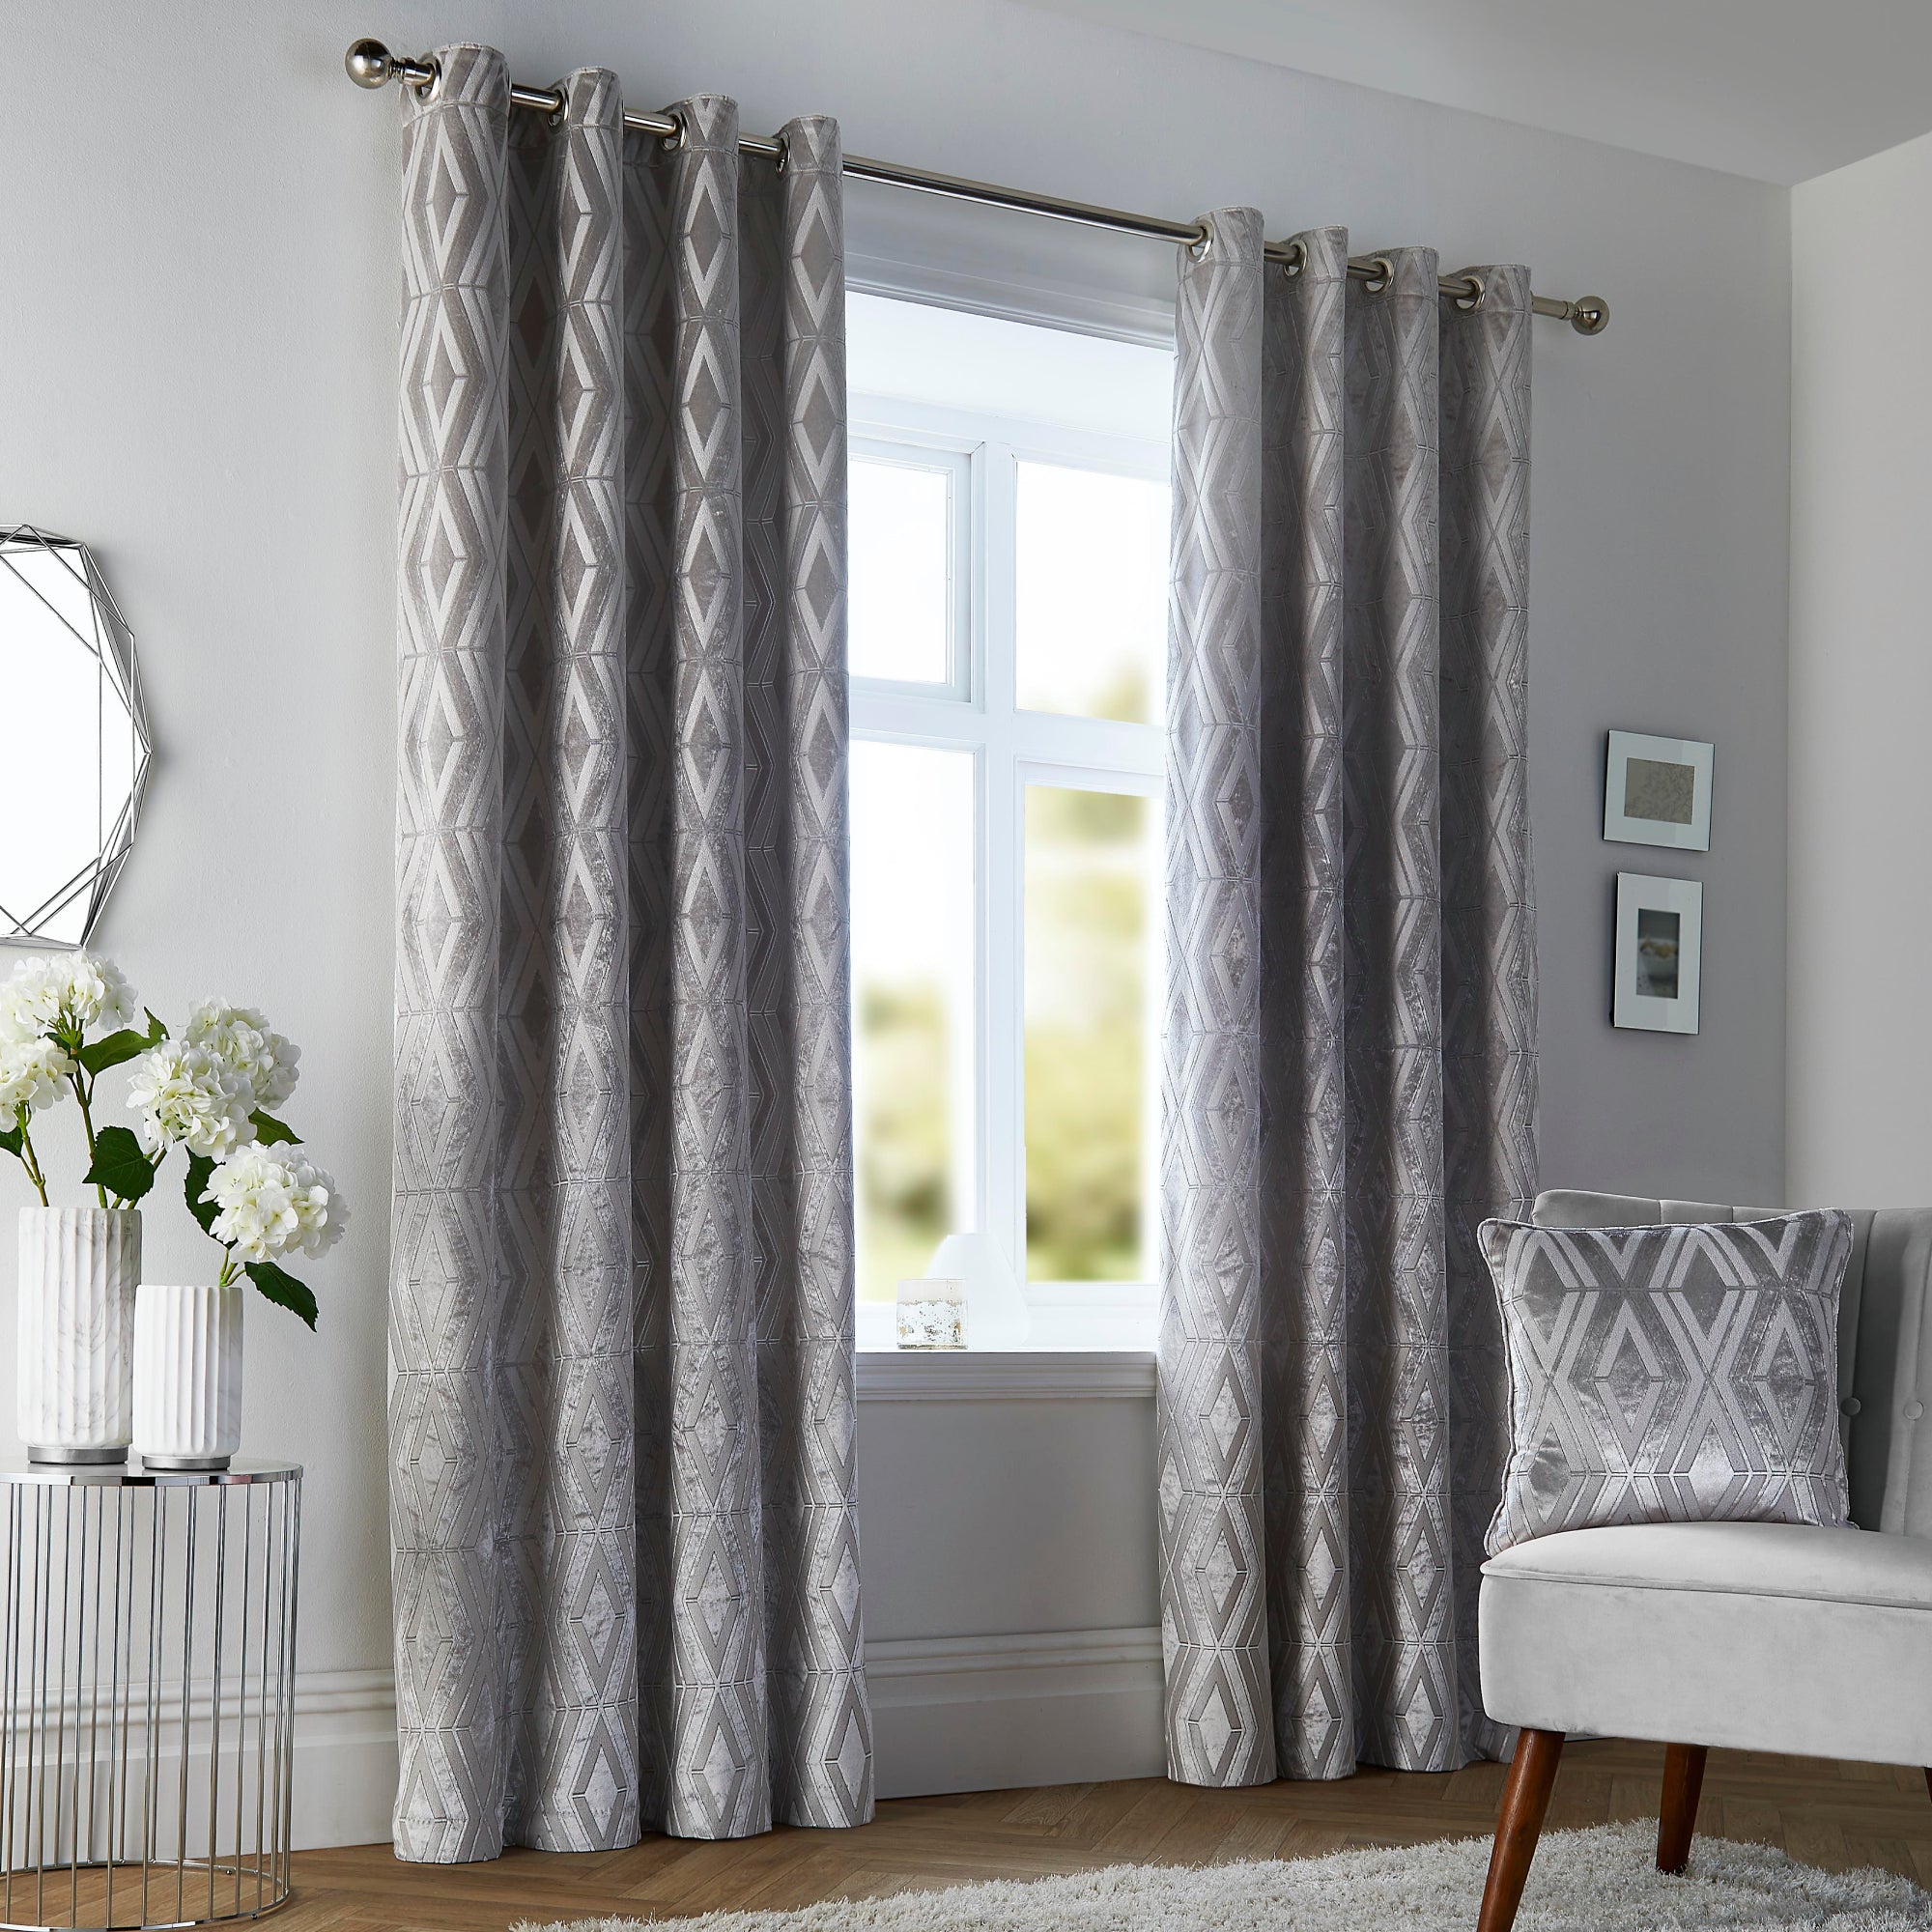 Pair of Eyelet Curtains Marco by Curtina in Silver